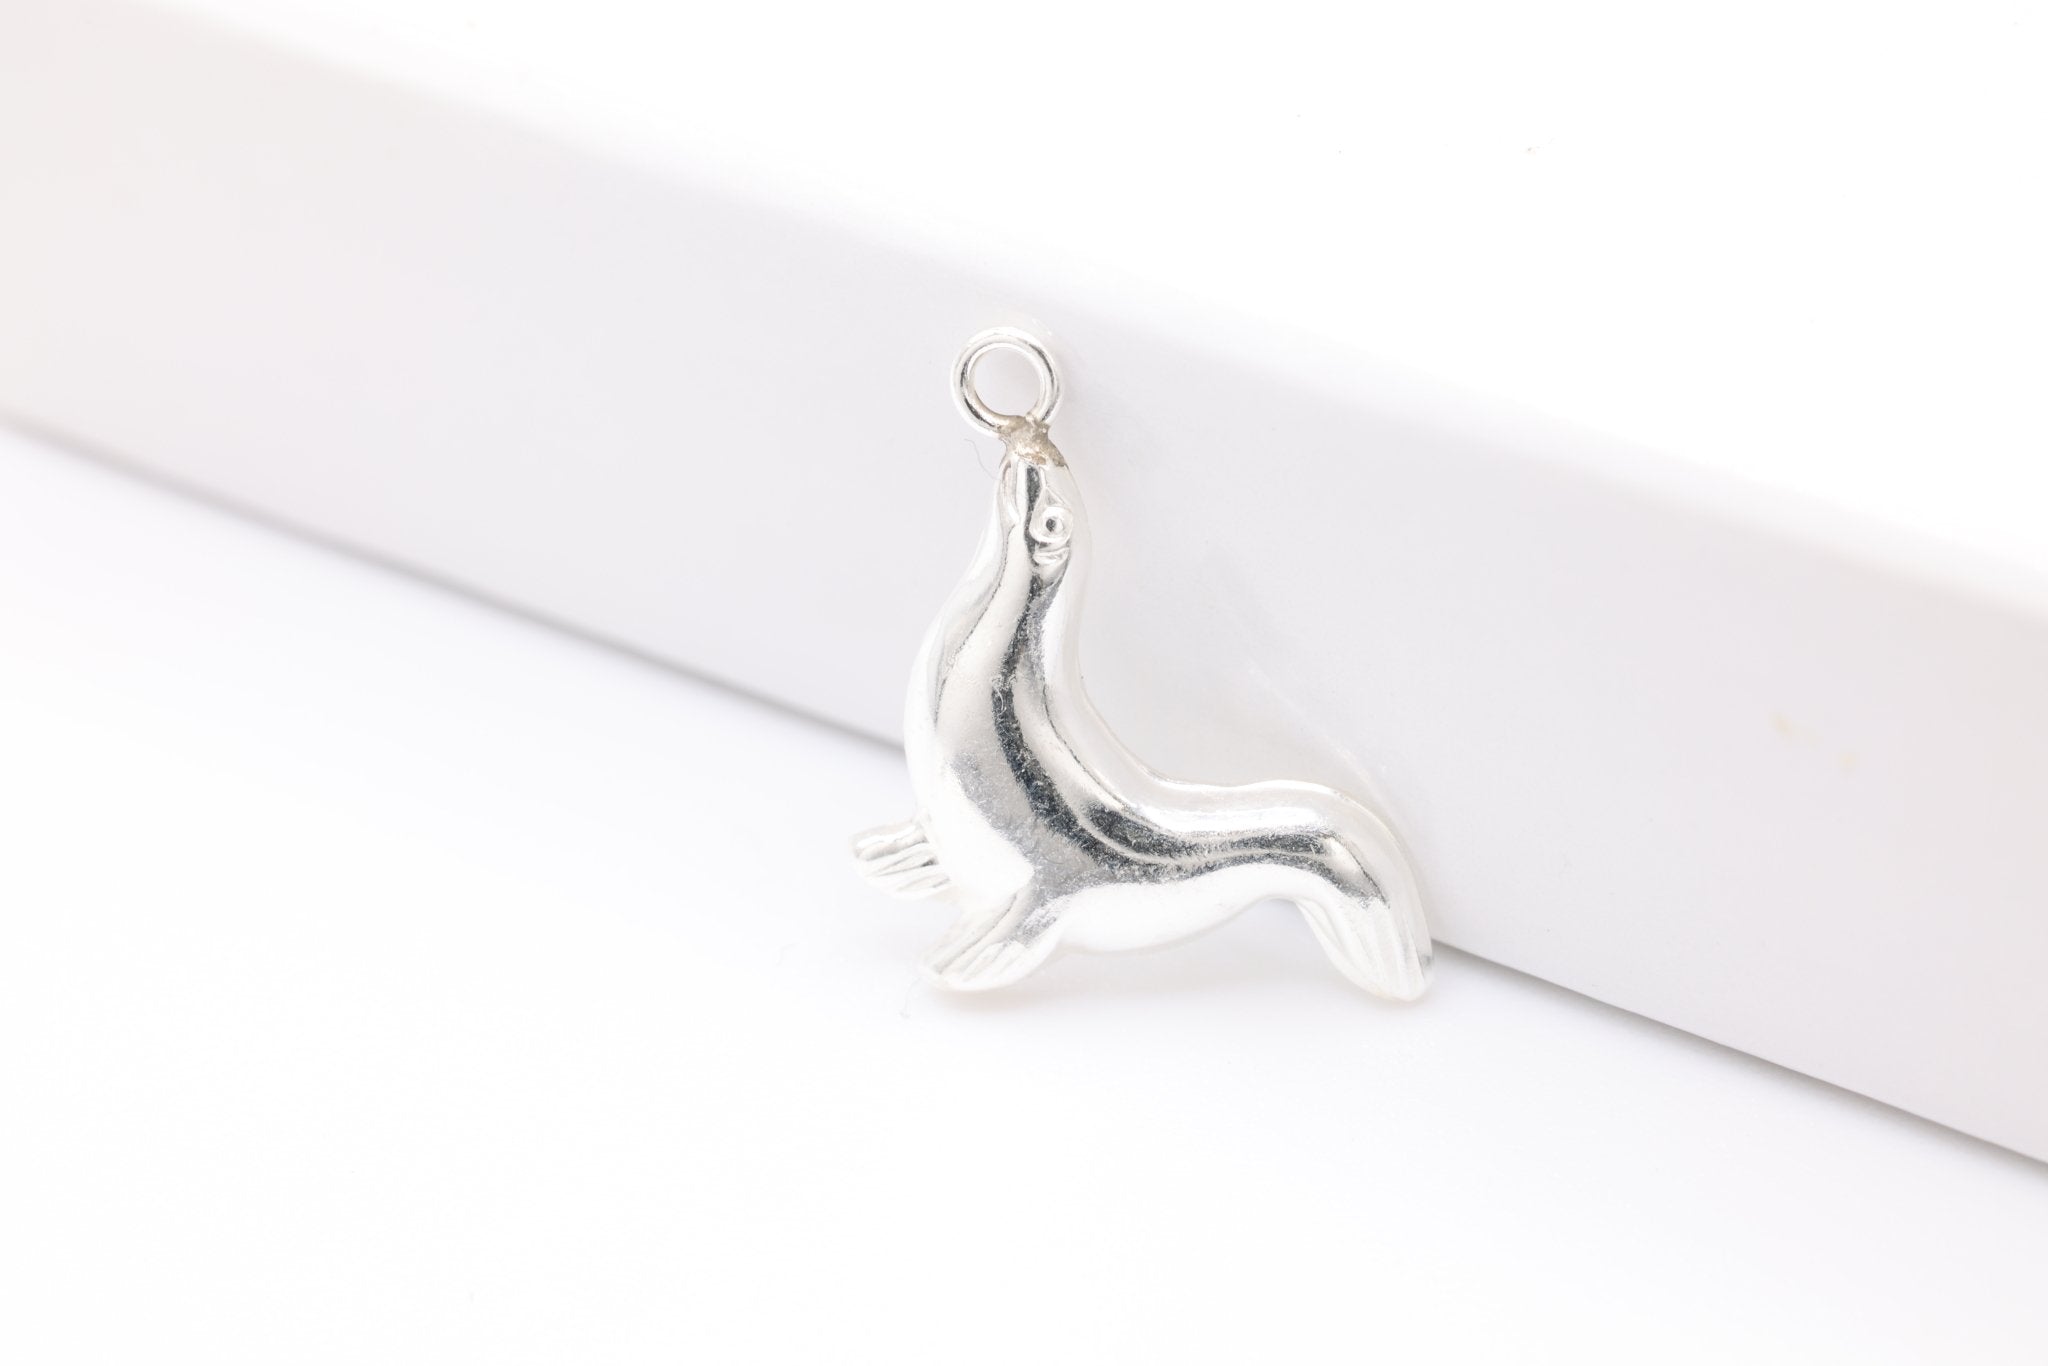 Seal Charm, 925 Sterling Silver, Stamped Seal Sealife Charm, Jewelry Making Charm - HarperCrown